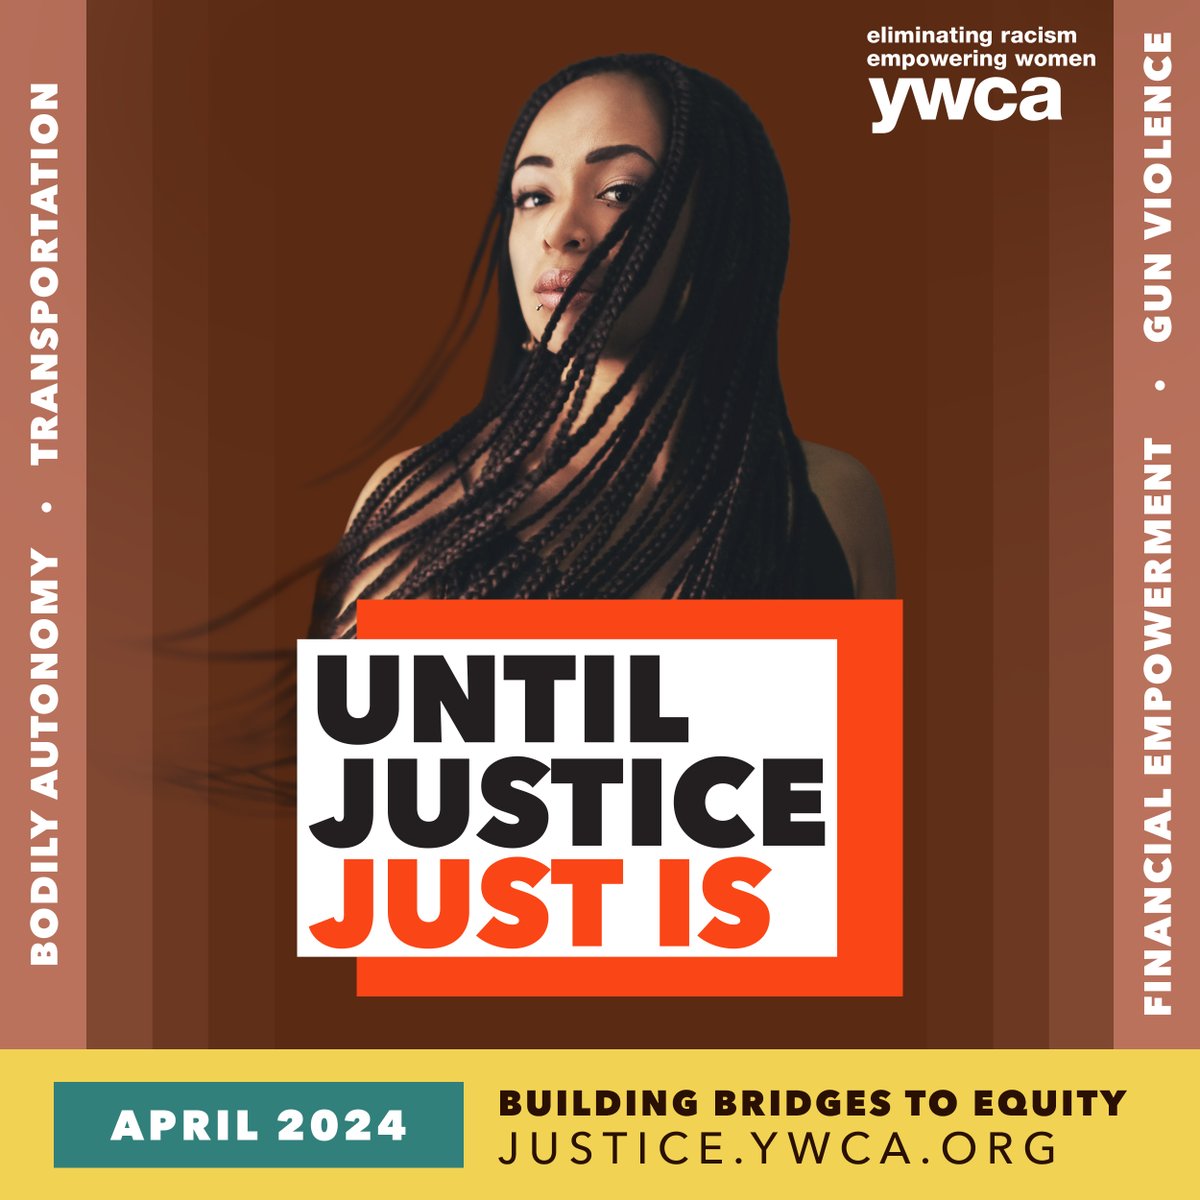 Until our parents and children are protected. Until we are treated with dignity, respect, and equality. Until justice… just is. That’s how long until our work to dismantle racism is done. Join the movement today 👉 justice.ywca.org #UntilJusticeJustIs #UJJI